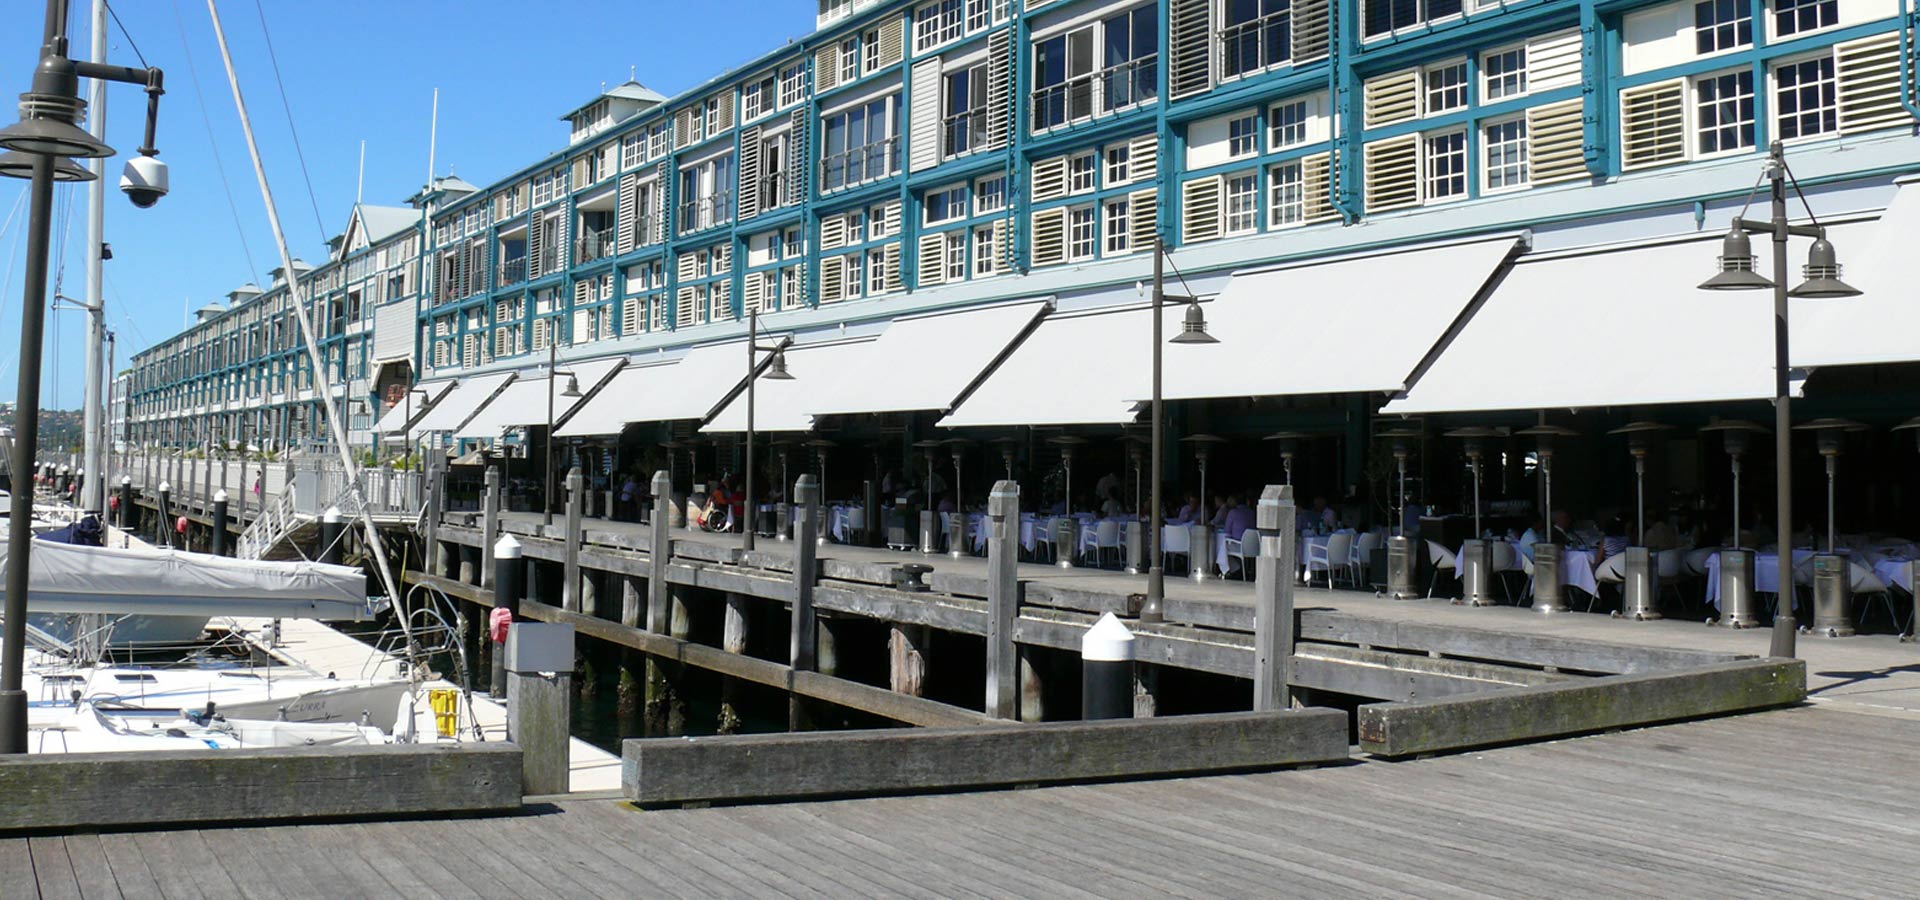 Awnings Commercial Awnings Sydney Alfresco Shade